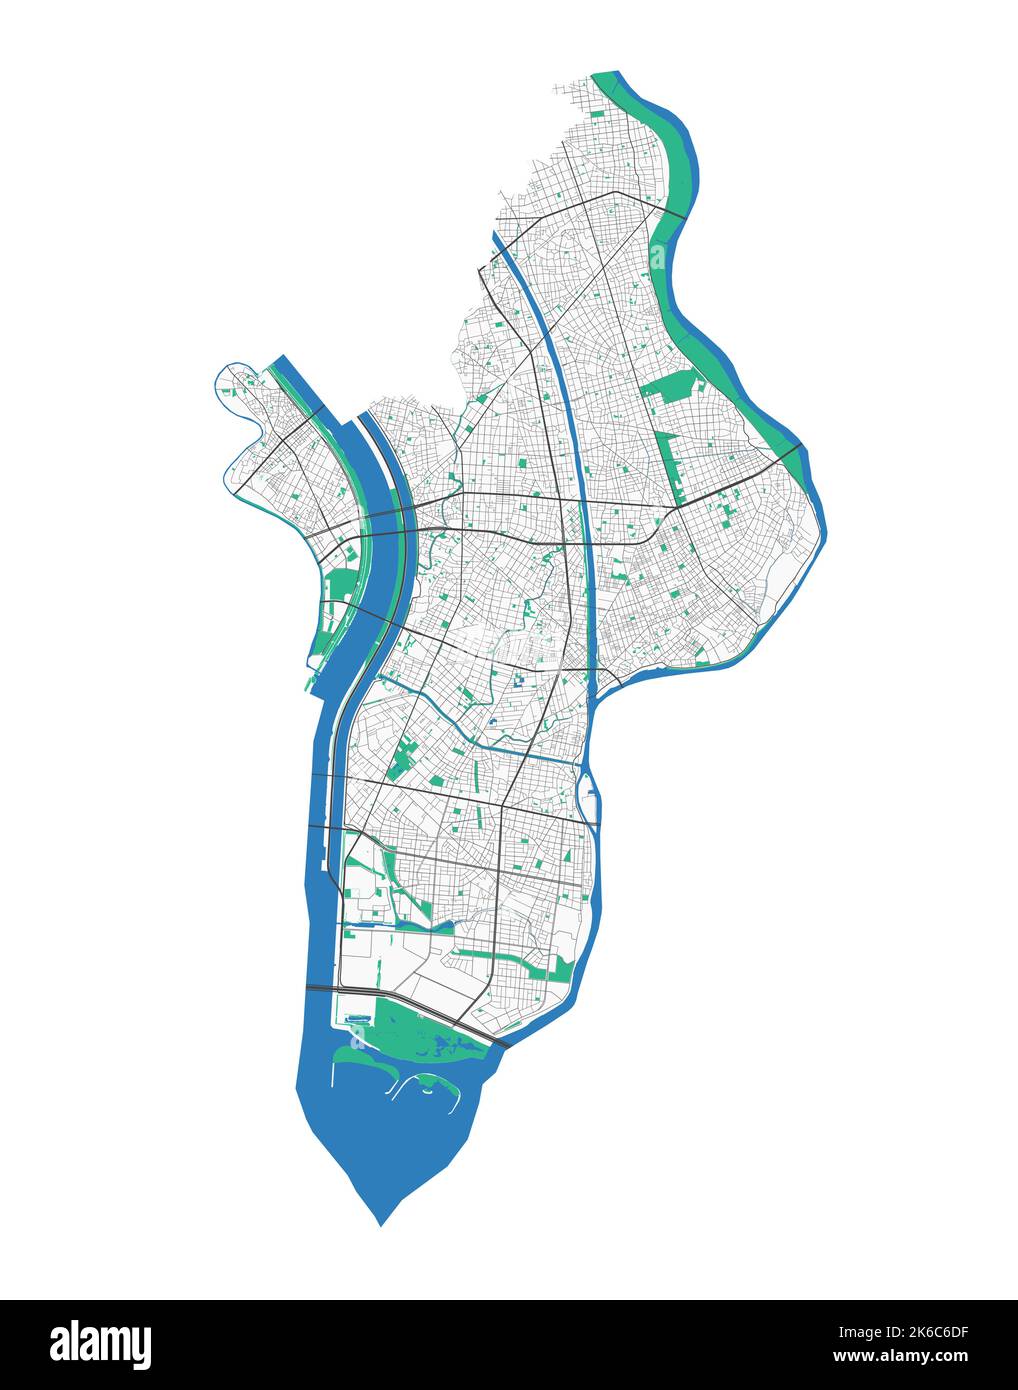 Edogawa map. Detailed map of Edogawa city administrative area. Cityscape panorama. Royalty free vector illustration. Road map with highways, rivers. Stock Vector